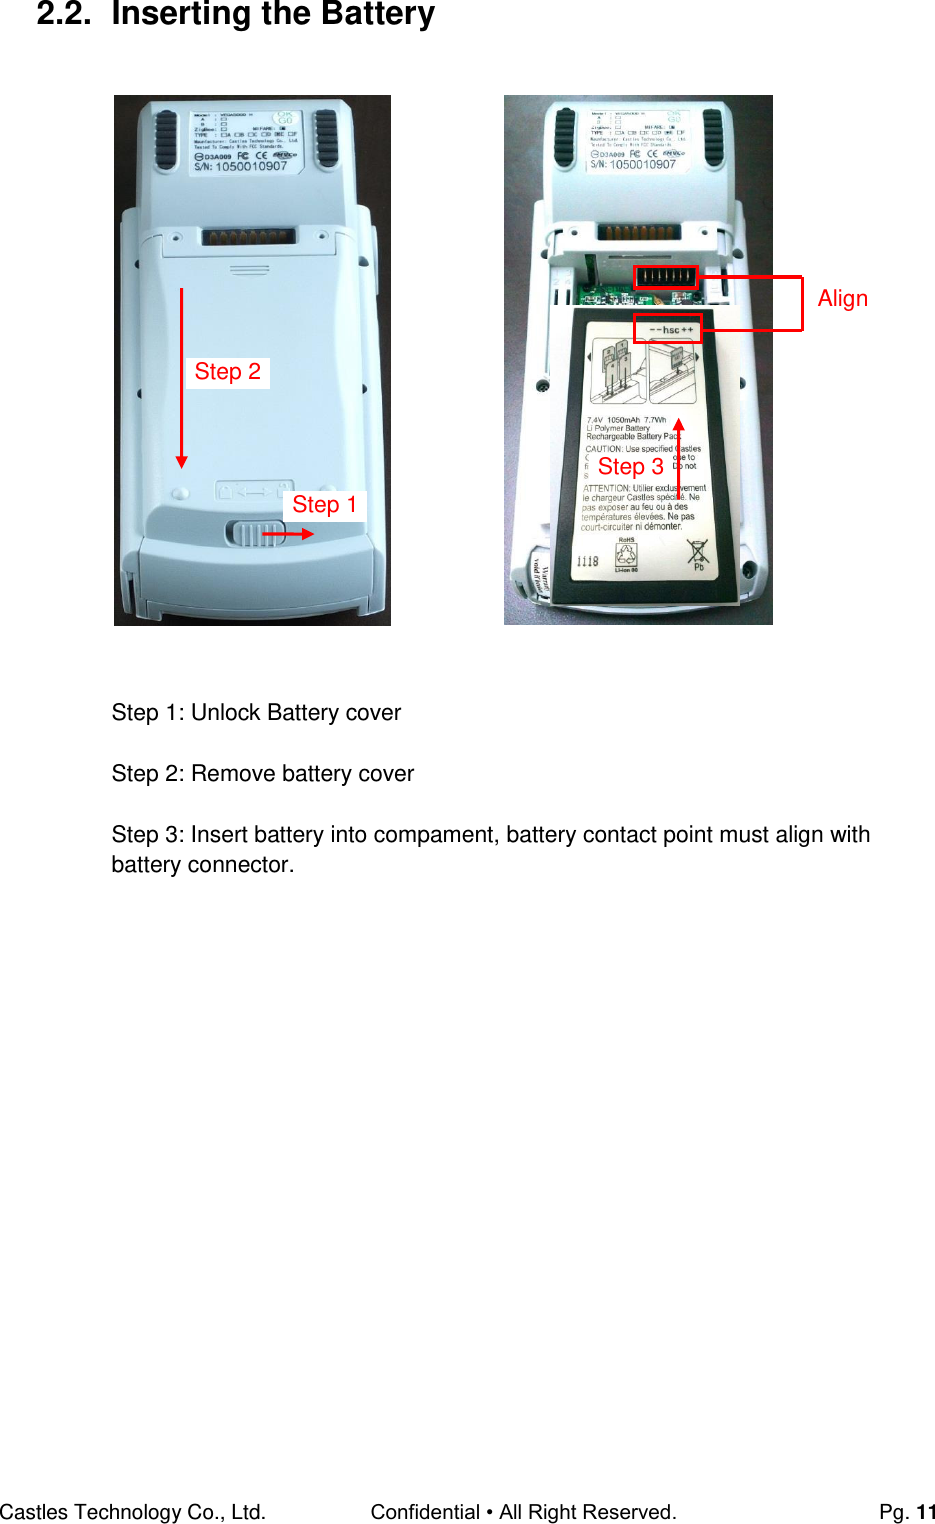 Castles Technology Co., Ltd. Confidential • All Right Reserved.  Pg. 11 2.2.  Inserting the Battery                      Step 1: Unlock Battery cover  Step 2: Remove battery cover  Step 3: Insert battery into compament, battery contact point must align with battery connector.     Align Step 3 Step 2 Step 1 